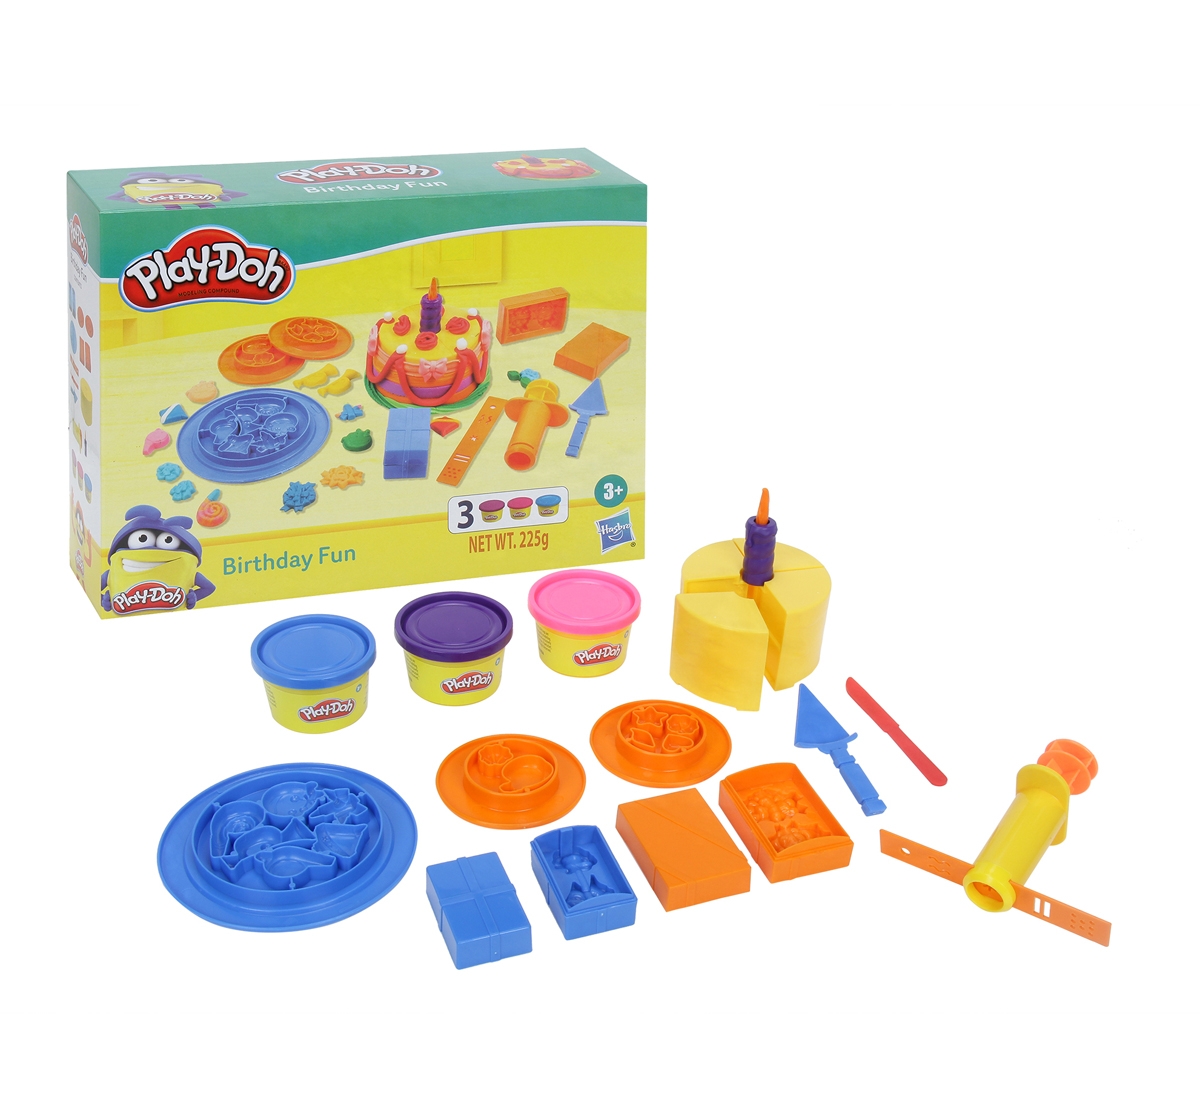 Play-Doh | Play Doh Birthday Fun Playset for Kids 3Y+, Multicolour